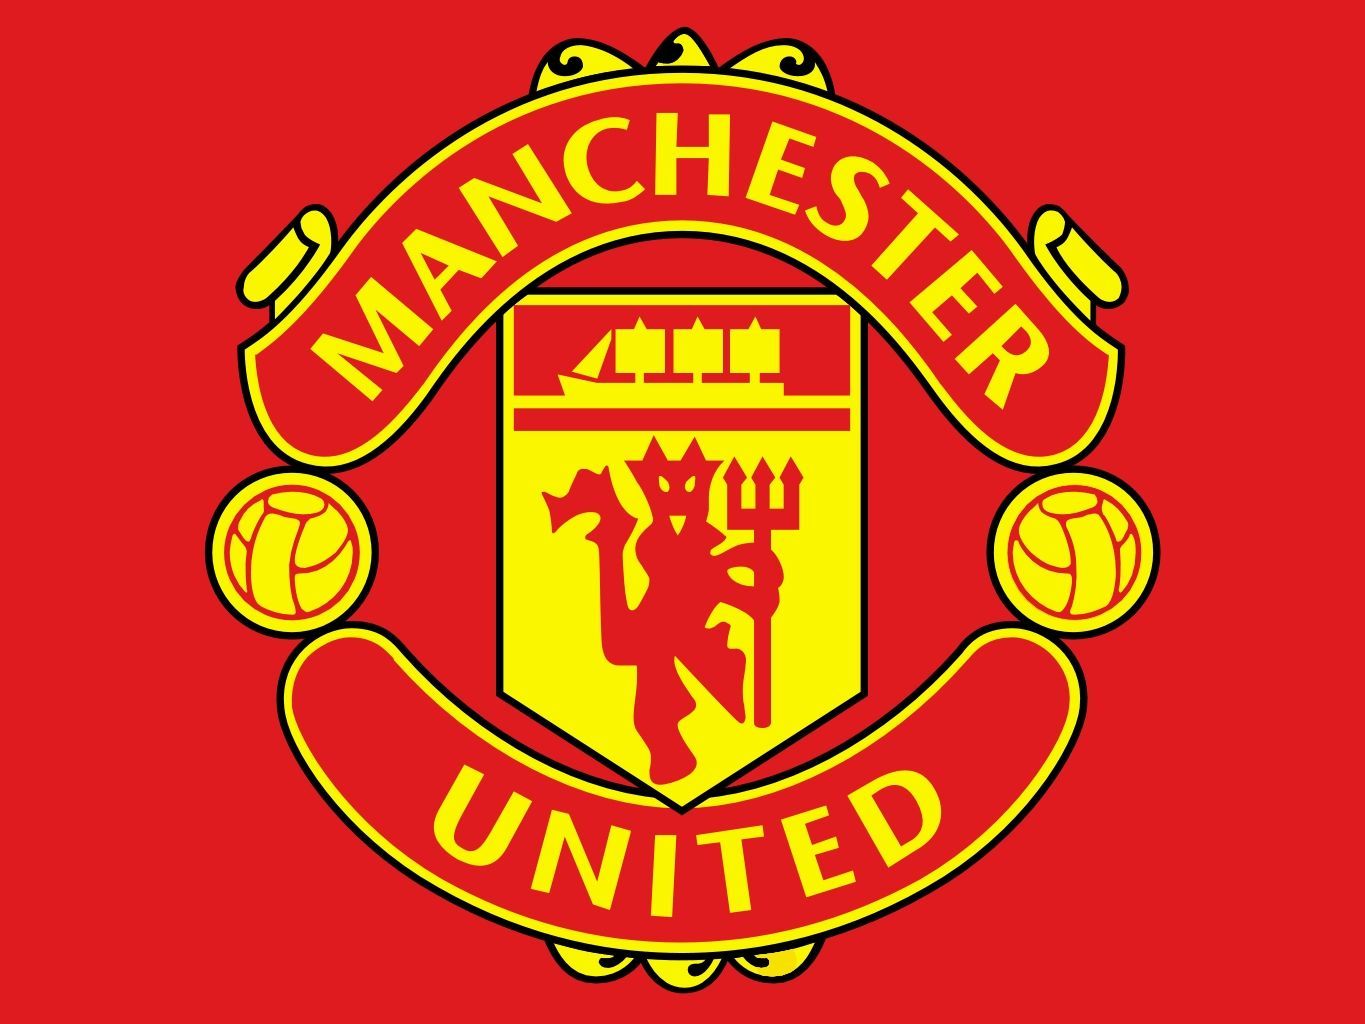 Color of the Manchester United Logo. Manchester united logo, Manchester united wallpaper, Manchester united